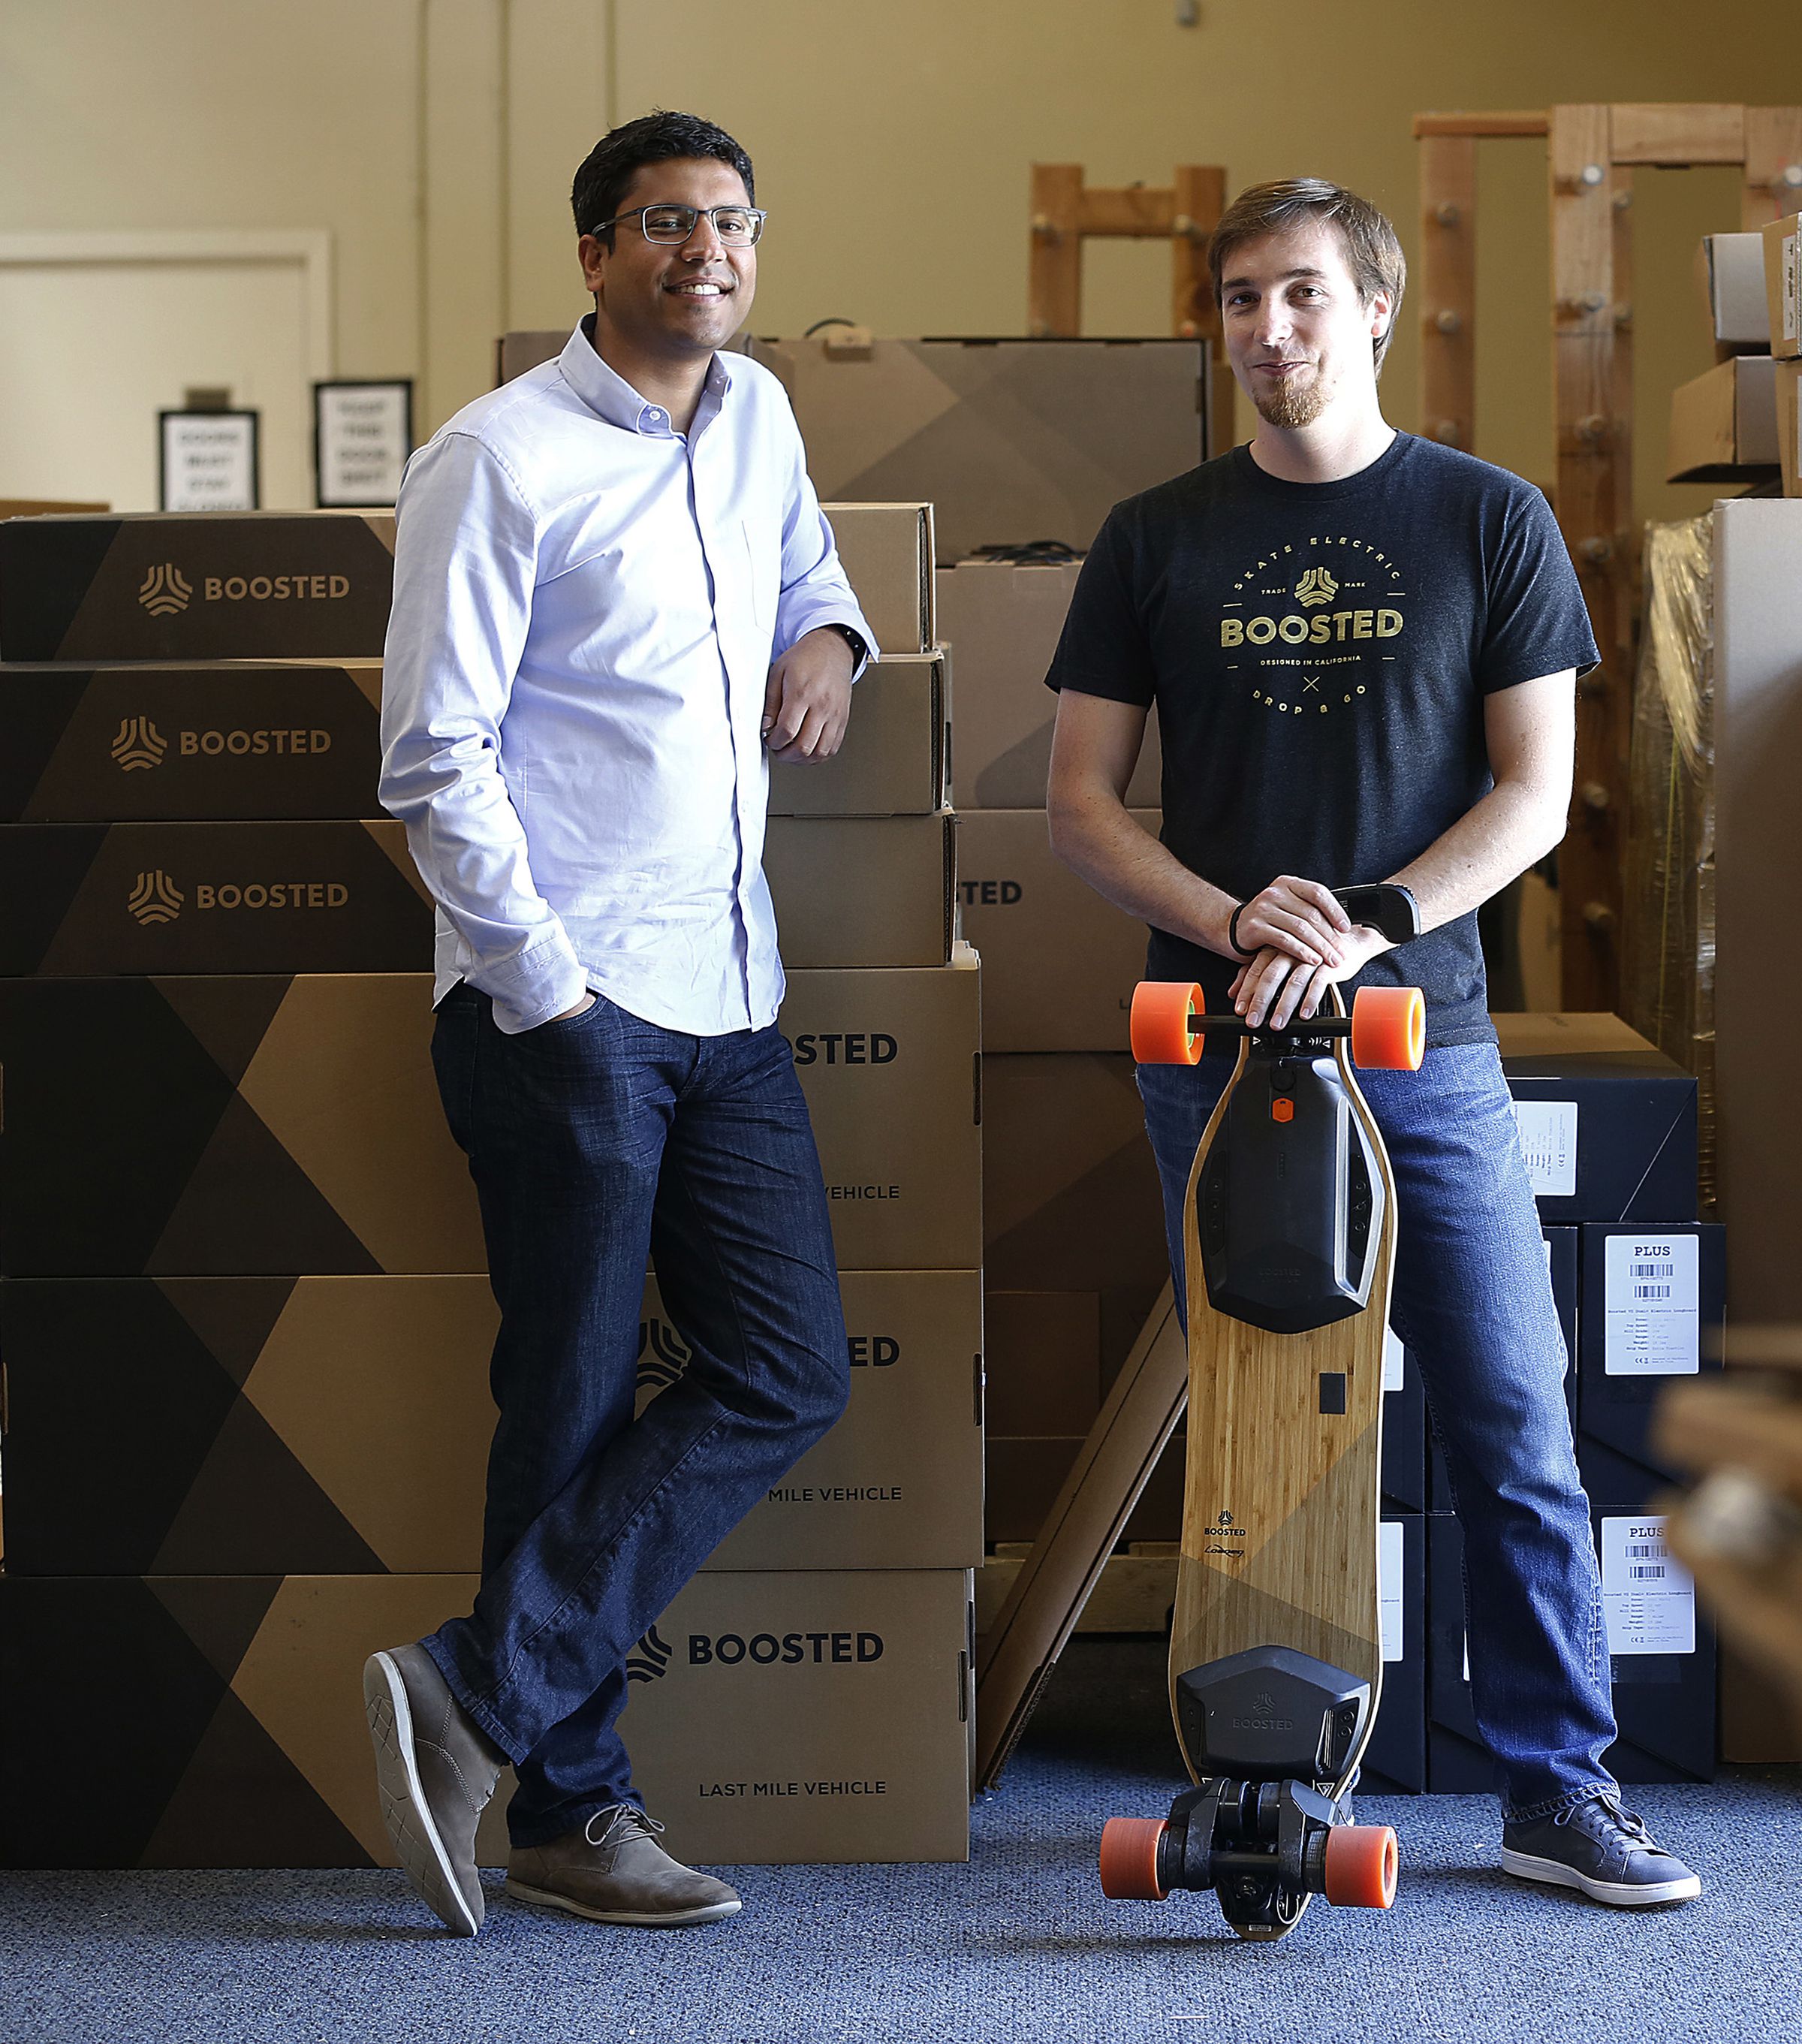 CEO Sanjay Dastoor (left) and CTO John Ulmen (right) Boosted Board, a battery powered skate board on Wednesday, June 14th, 2017, in San Francisco, California.